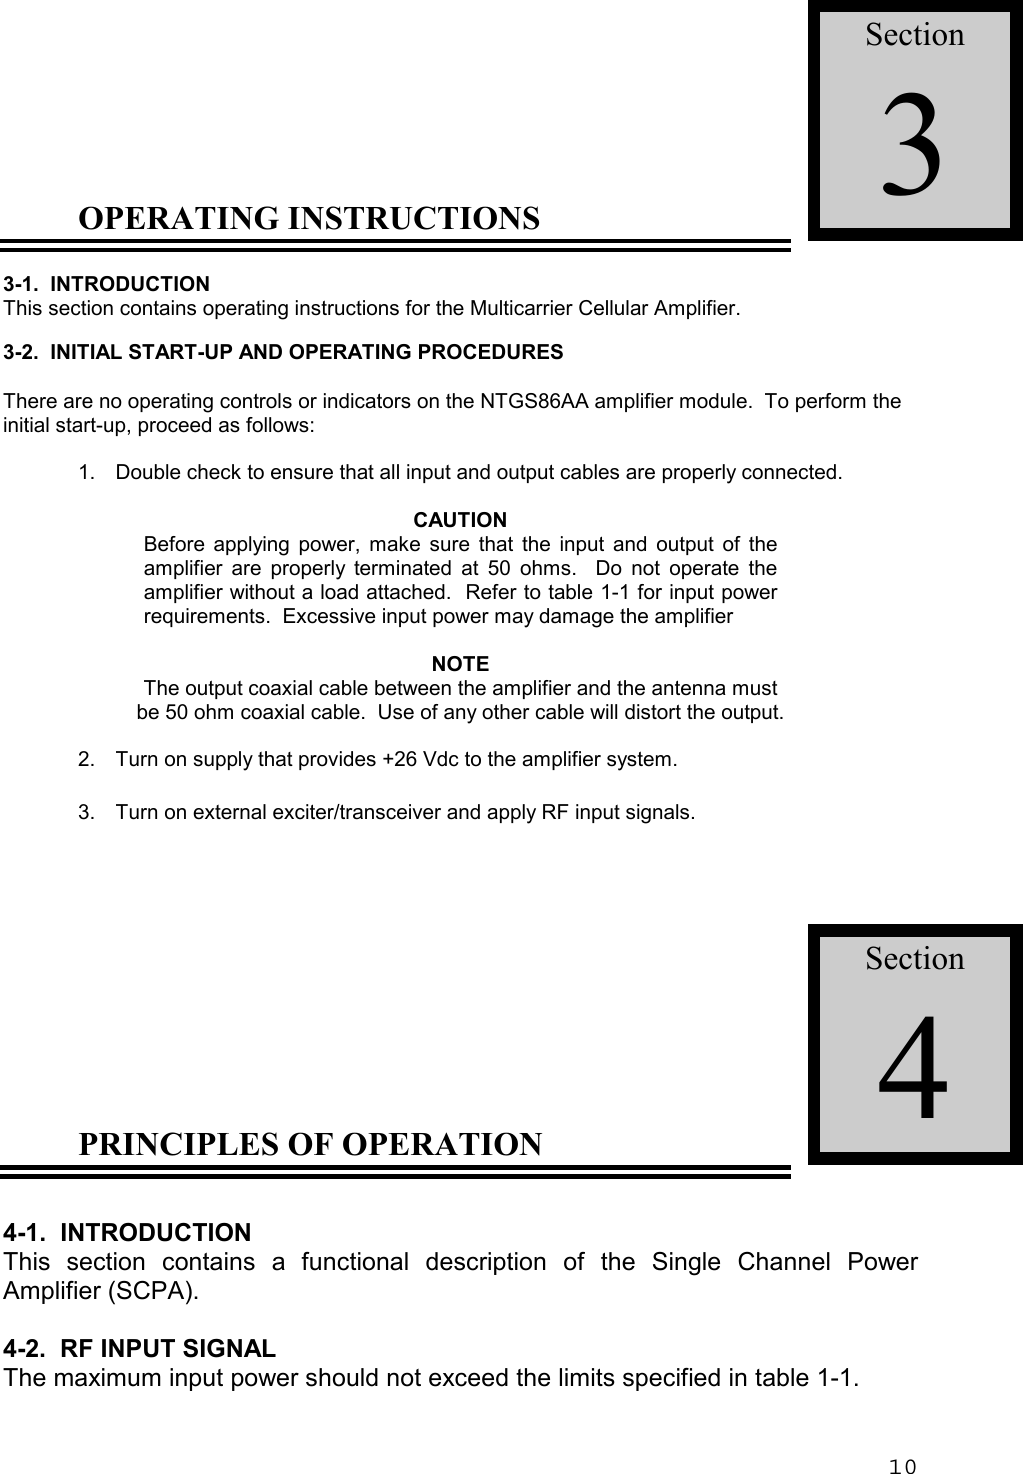 10OPERATING INSTRUCTIONS3-1.  INTRODUCTIONThis section contains operating instructions for the Multicarrier Cellular Amplifier.3-2.  INITIAL START-UP AND OPERATING PROCEDURESThere are no operating controls or indicators on the NTGS86AA amplifier module.  To perform theinitial start-up, proceed as follows:1. Double check to ensure that all input and output cables are properly connected.CAUTIONBefore applying power, make sure that the input and output of theamplifier are properly terminated at 50 ohms.  Do not operate theamplifier without a load attached.  Refer to table 1-1 for input powerrequirements.  Excessive input power may damage the amplifierNOTEThe output coaxial cable between the amplifier and the antenna mustbe 50 ohm coaxial cable.  Use of any other cable will distort the output.2.  Turn on supply that provides +26 Vdc to the amplifier system.3. Turn on external exciter/transceiver and apply RF input signals.PRINCIPLES OF OPERATION4-1.  INTRODUCTIONThis section contains a functional description of the Single Channel PowerAmplifier (SCPA).4-2.  RF INPUT SIGNALThe maximum input power should not exceed the limits specified in table 1-1.Section3Section4